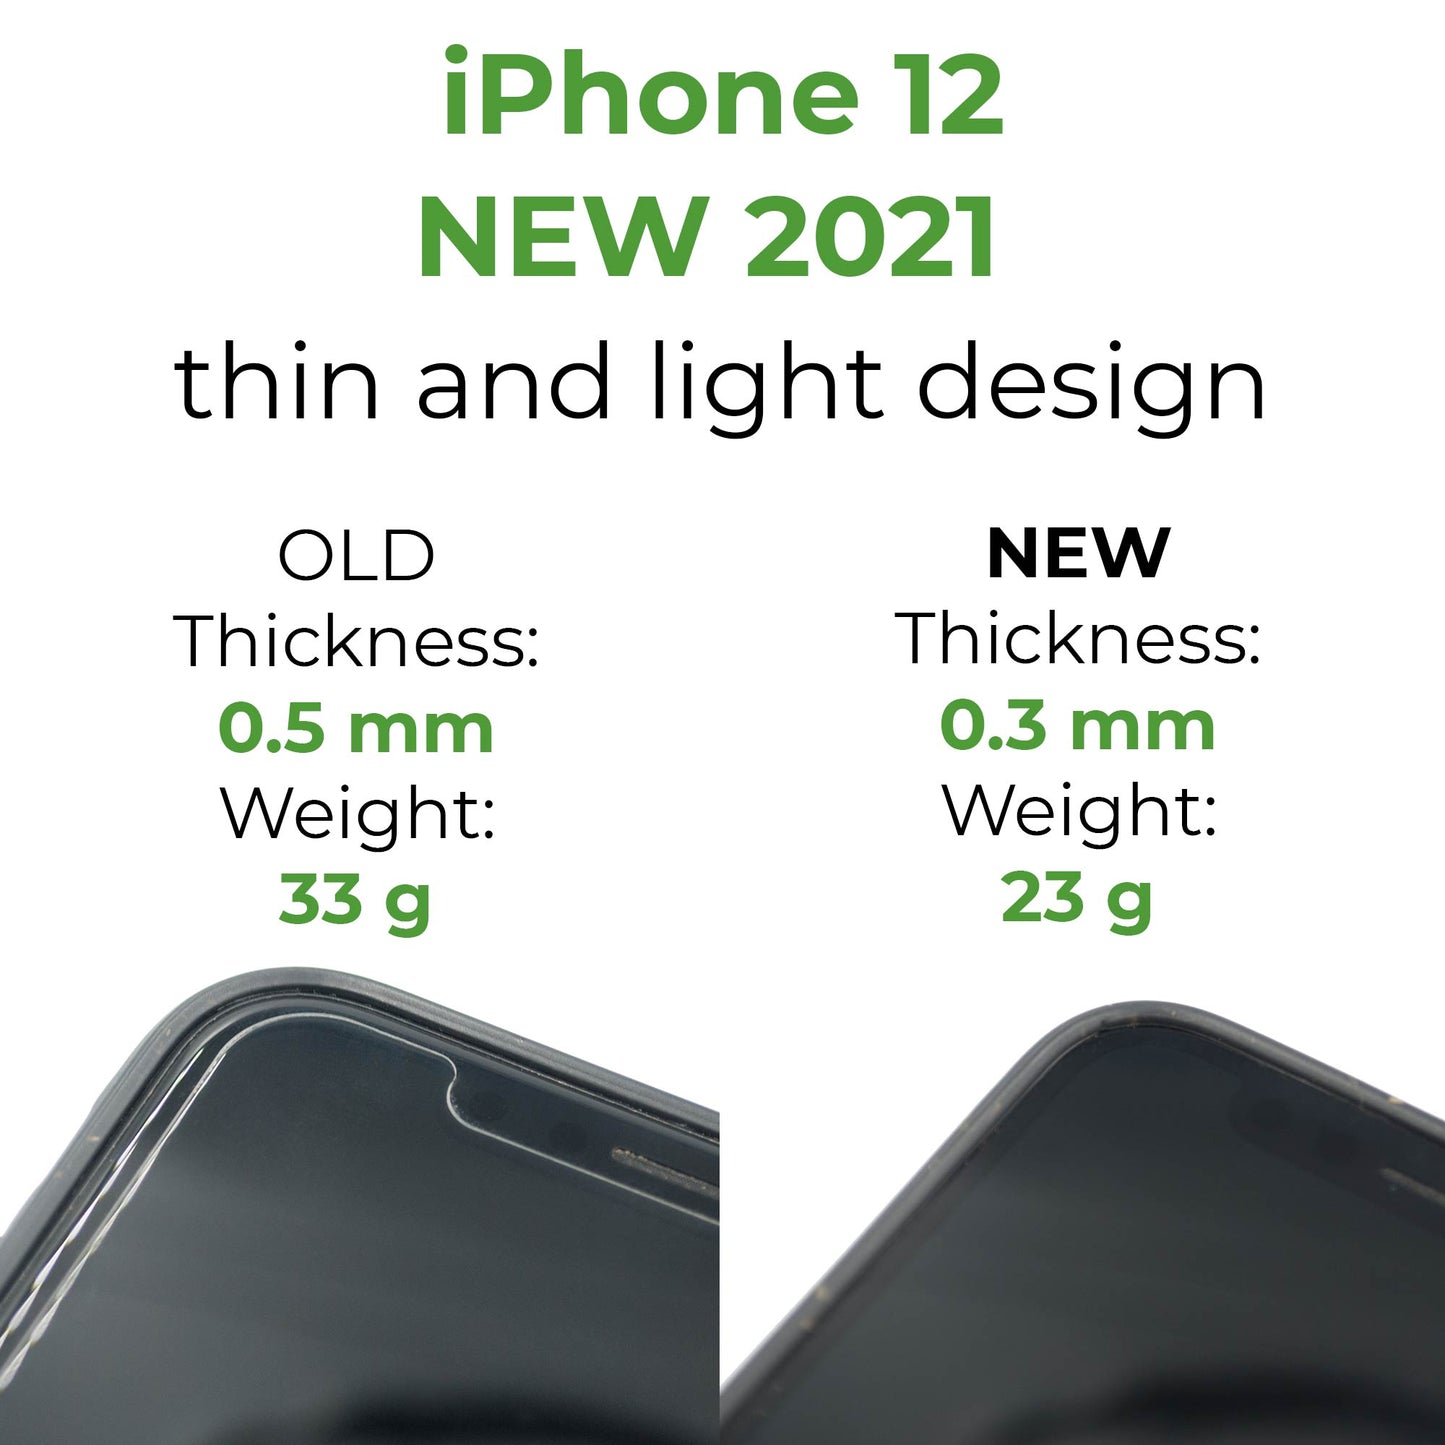 Comparative advertisement showing the old and new iPhone 12 models highlighting reduced thickness from 0.5 mm to 0.3 mm while maintaining the same weight at 23 grams, packaged with an Eco-friendly Biodegradable Personalized iPhone Case in Black by Tan Lily.